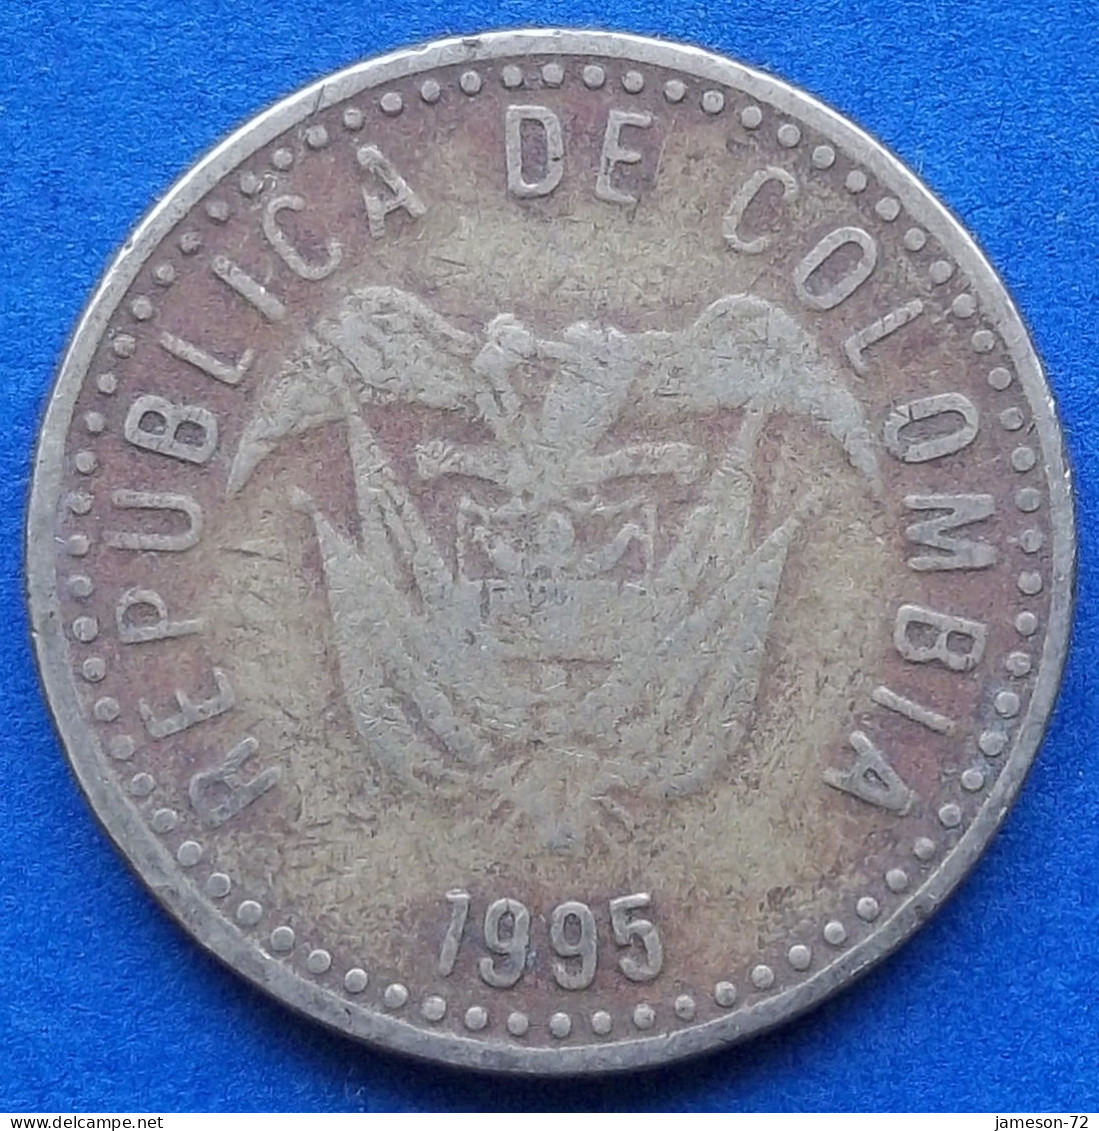 COLOMBIA - 100 Pesos 1995 KM# 285.2 Republic - Edelweiss Coins - Colombia